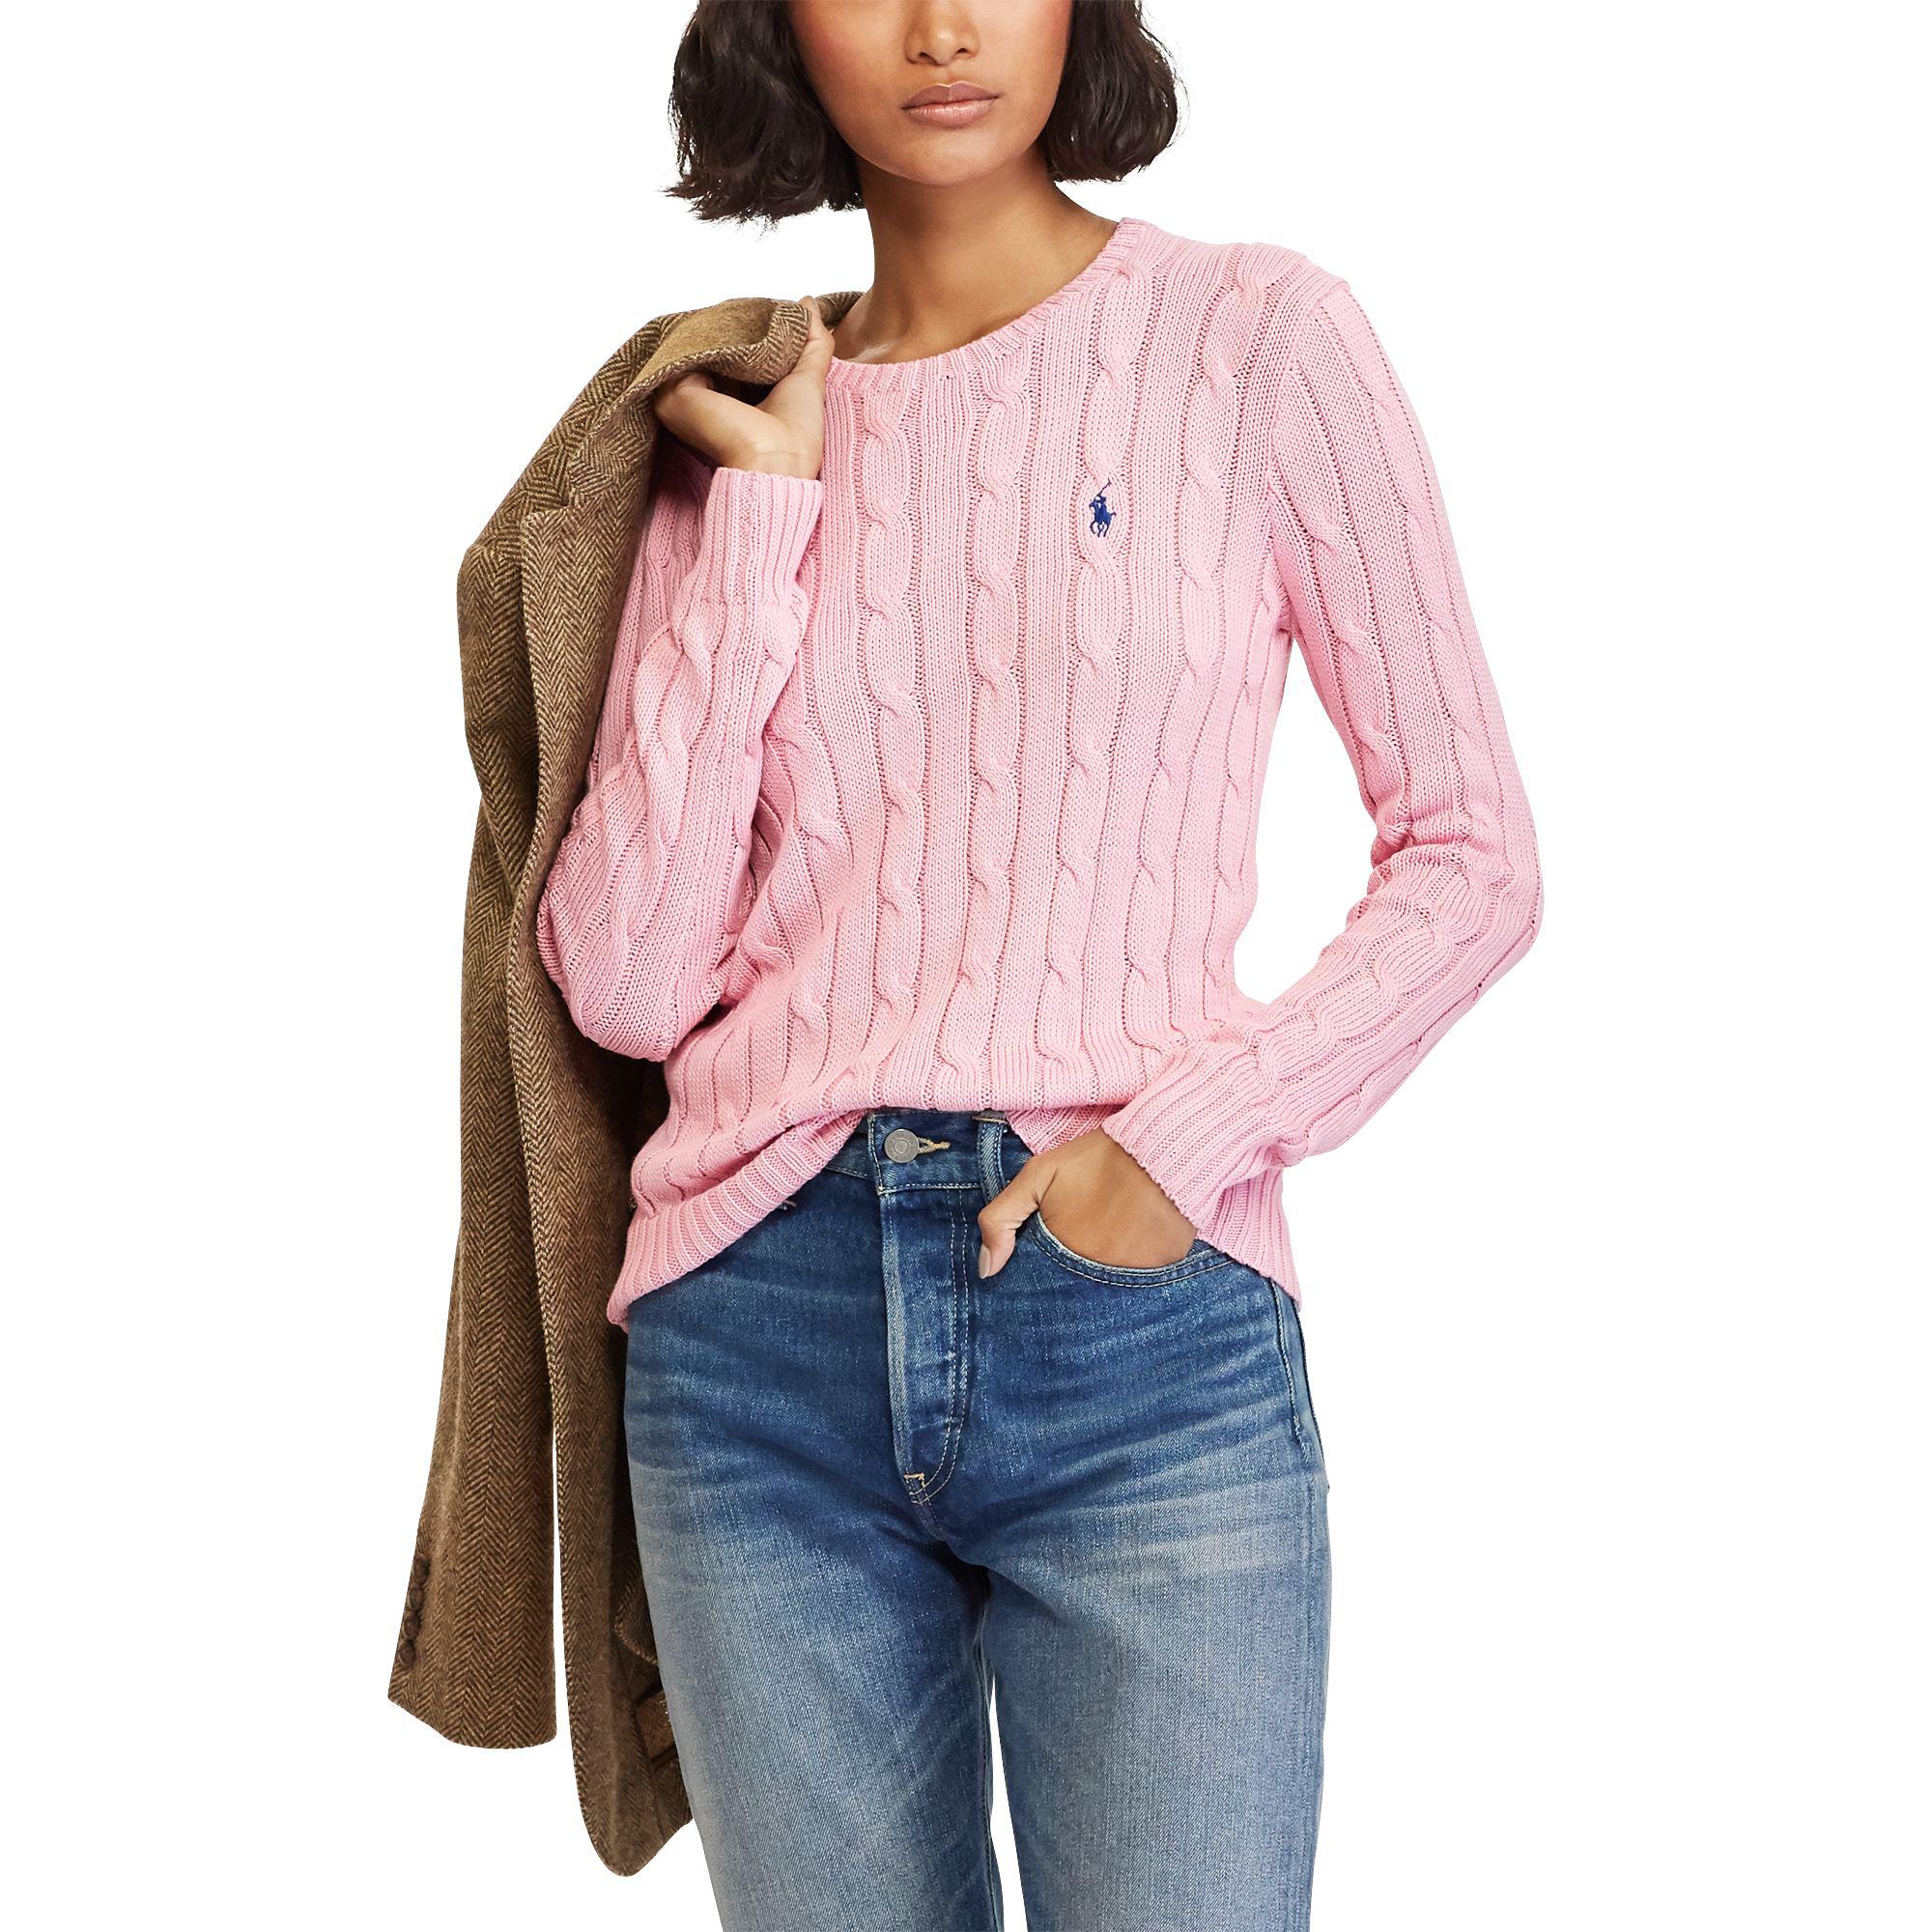 Polo Ralph Lauren Cable-knit Cotton Sweater in Pink | Lyst